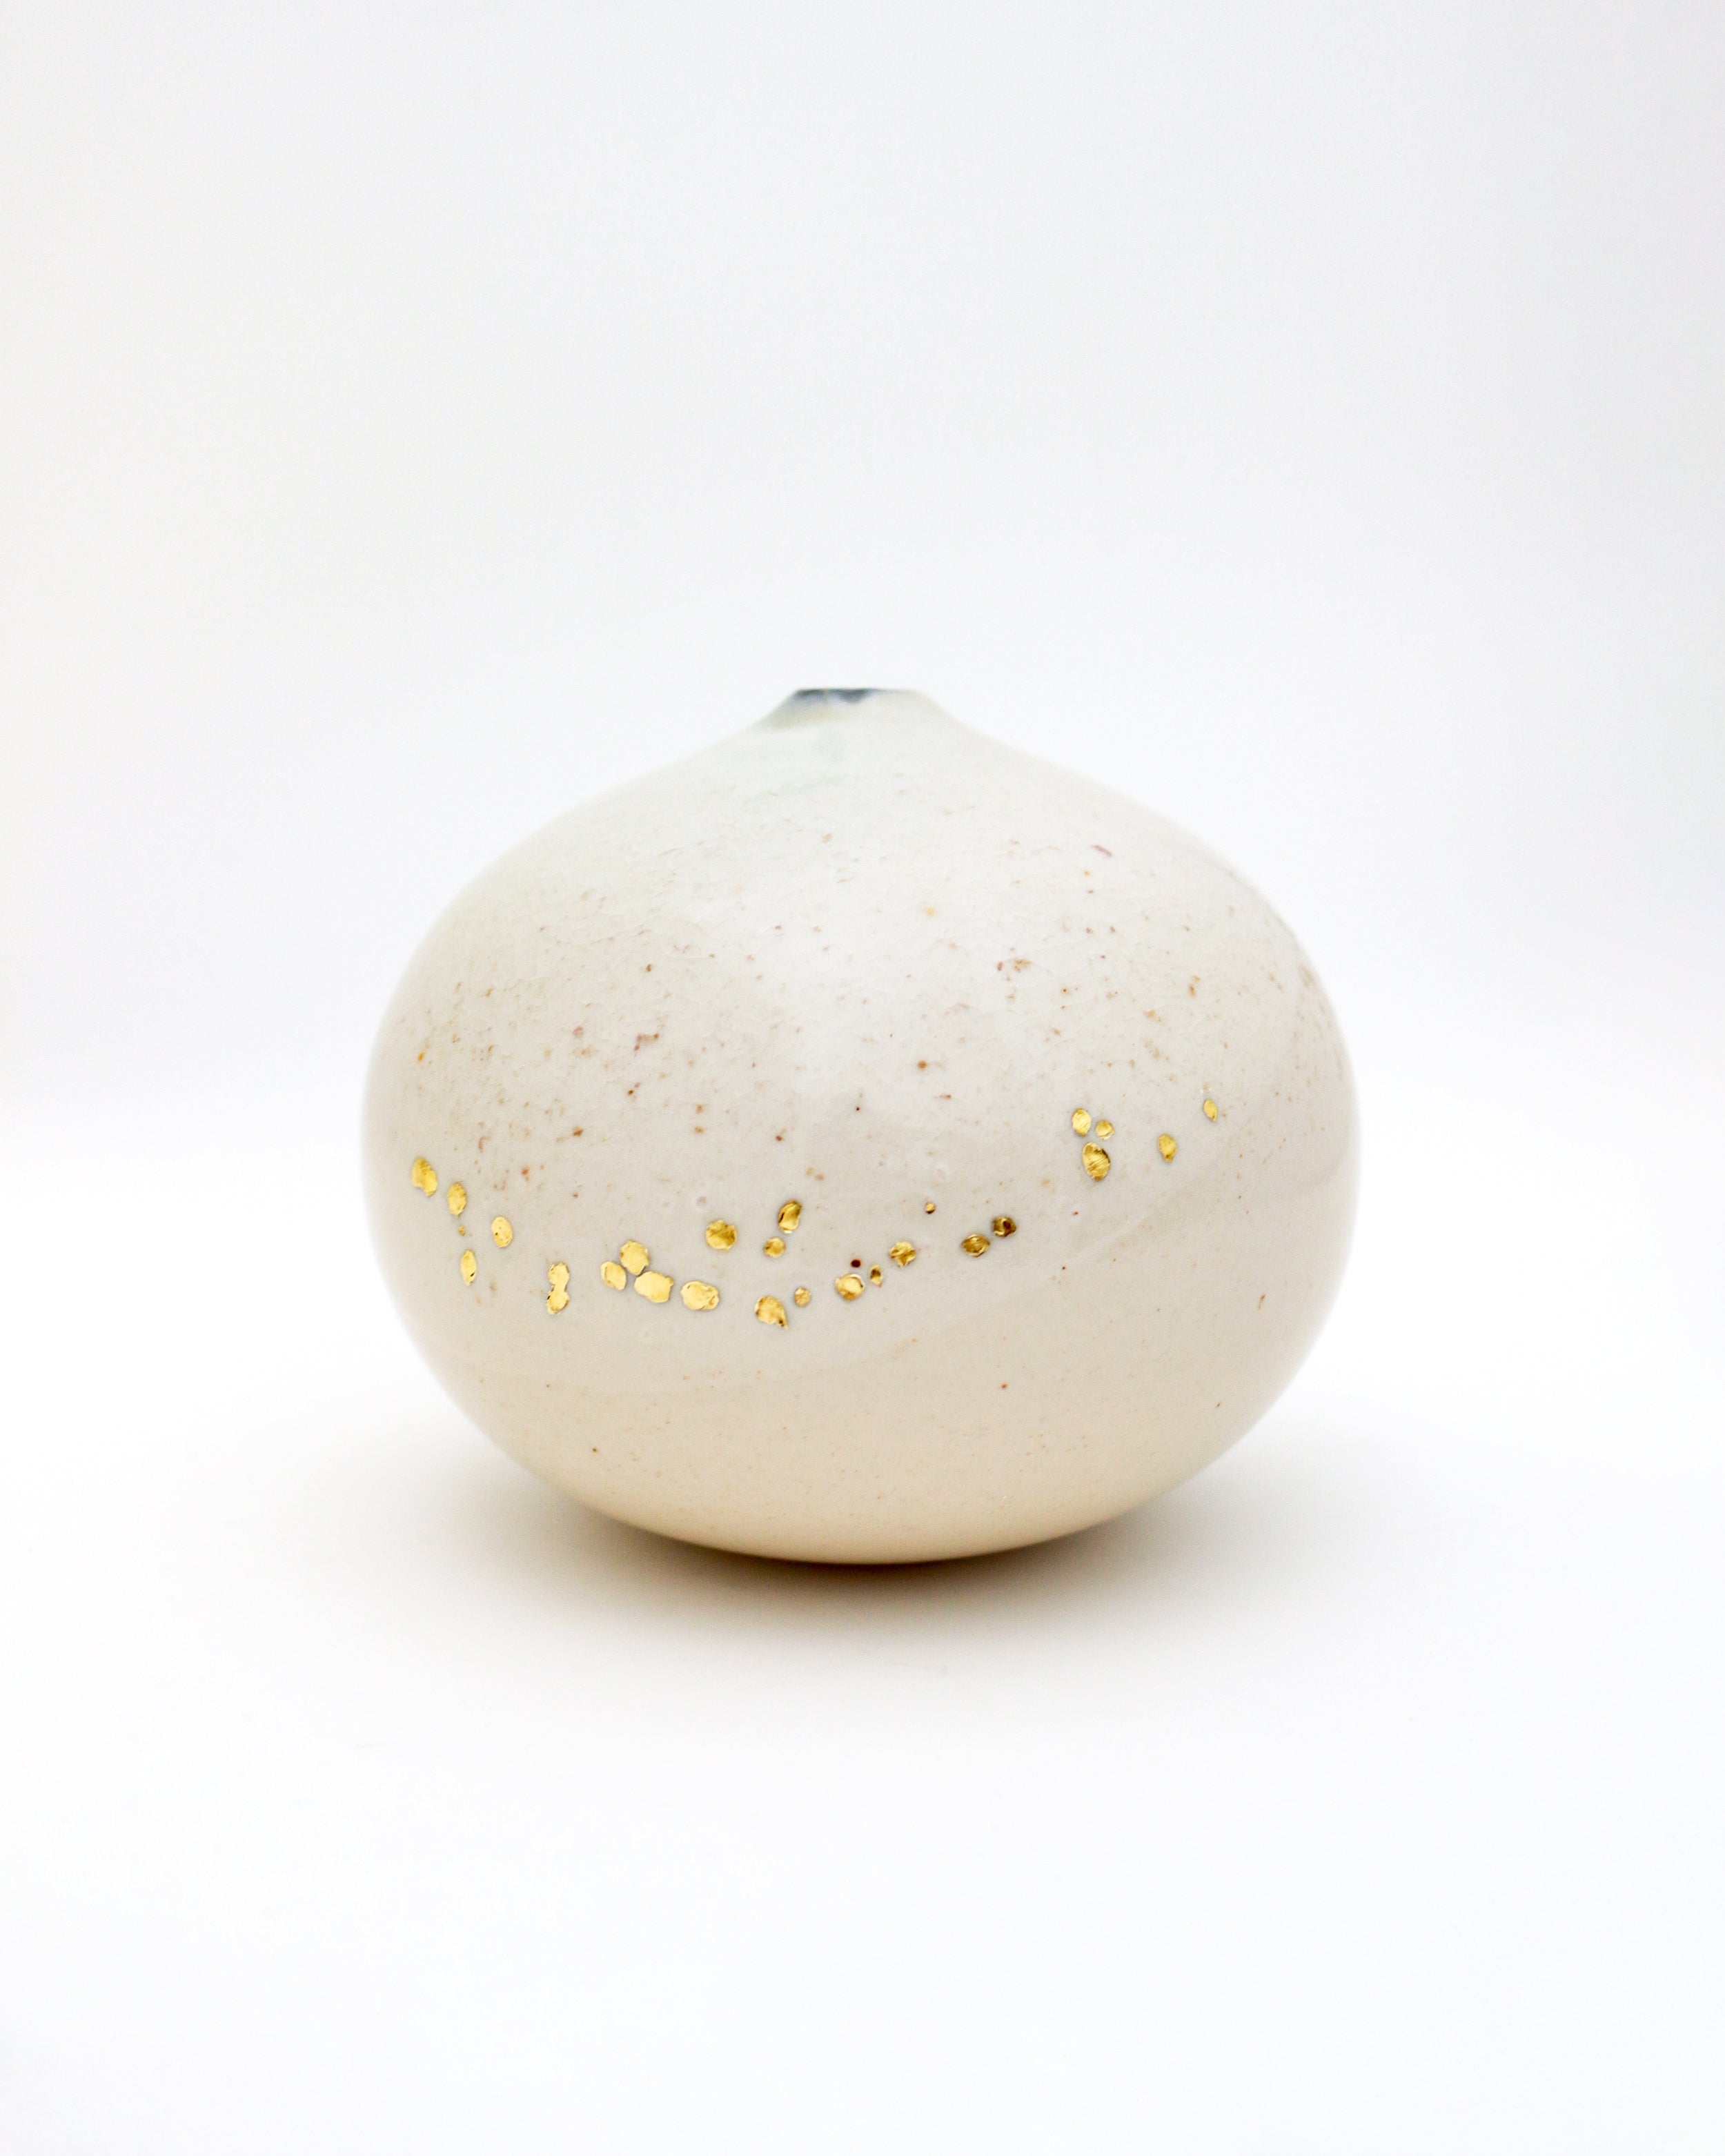 Wood-fired spherical vase with golden pinholes